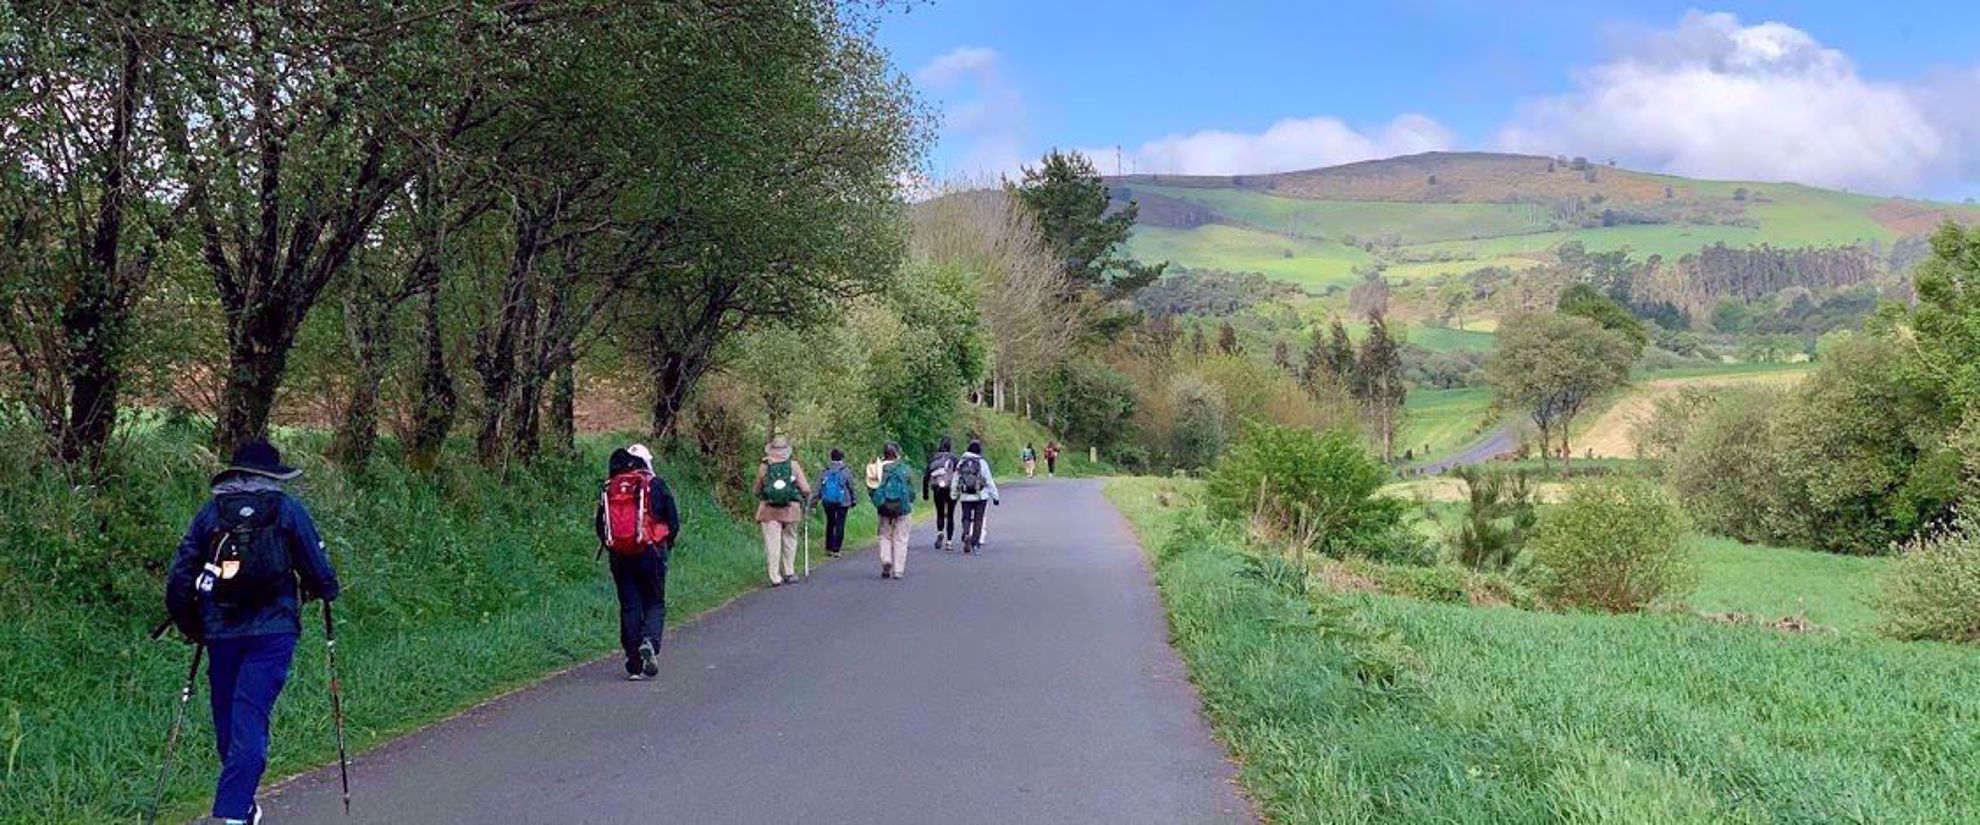 Group tour walking on paved camino de santiago with green rolling hills